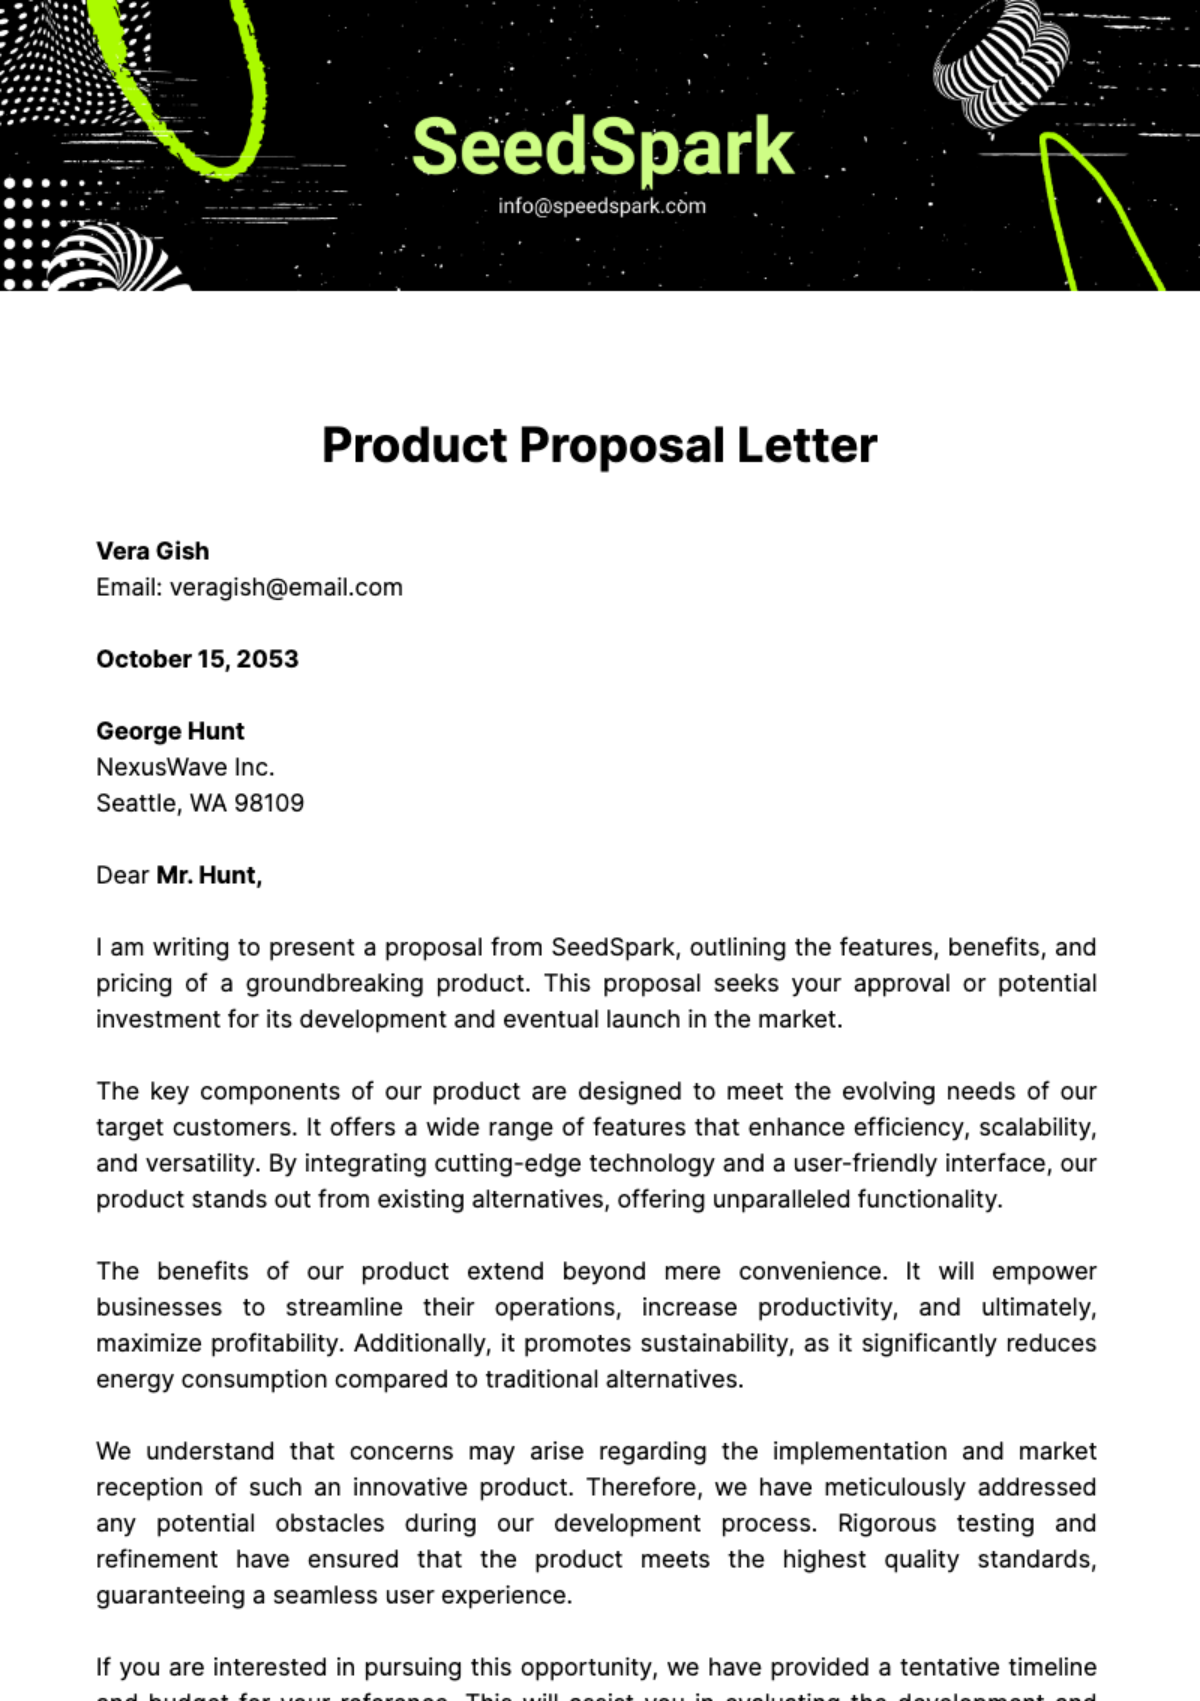 Product Proposal Letter Template